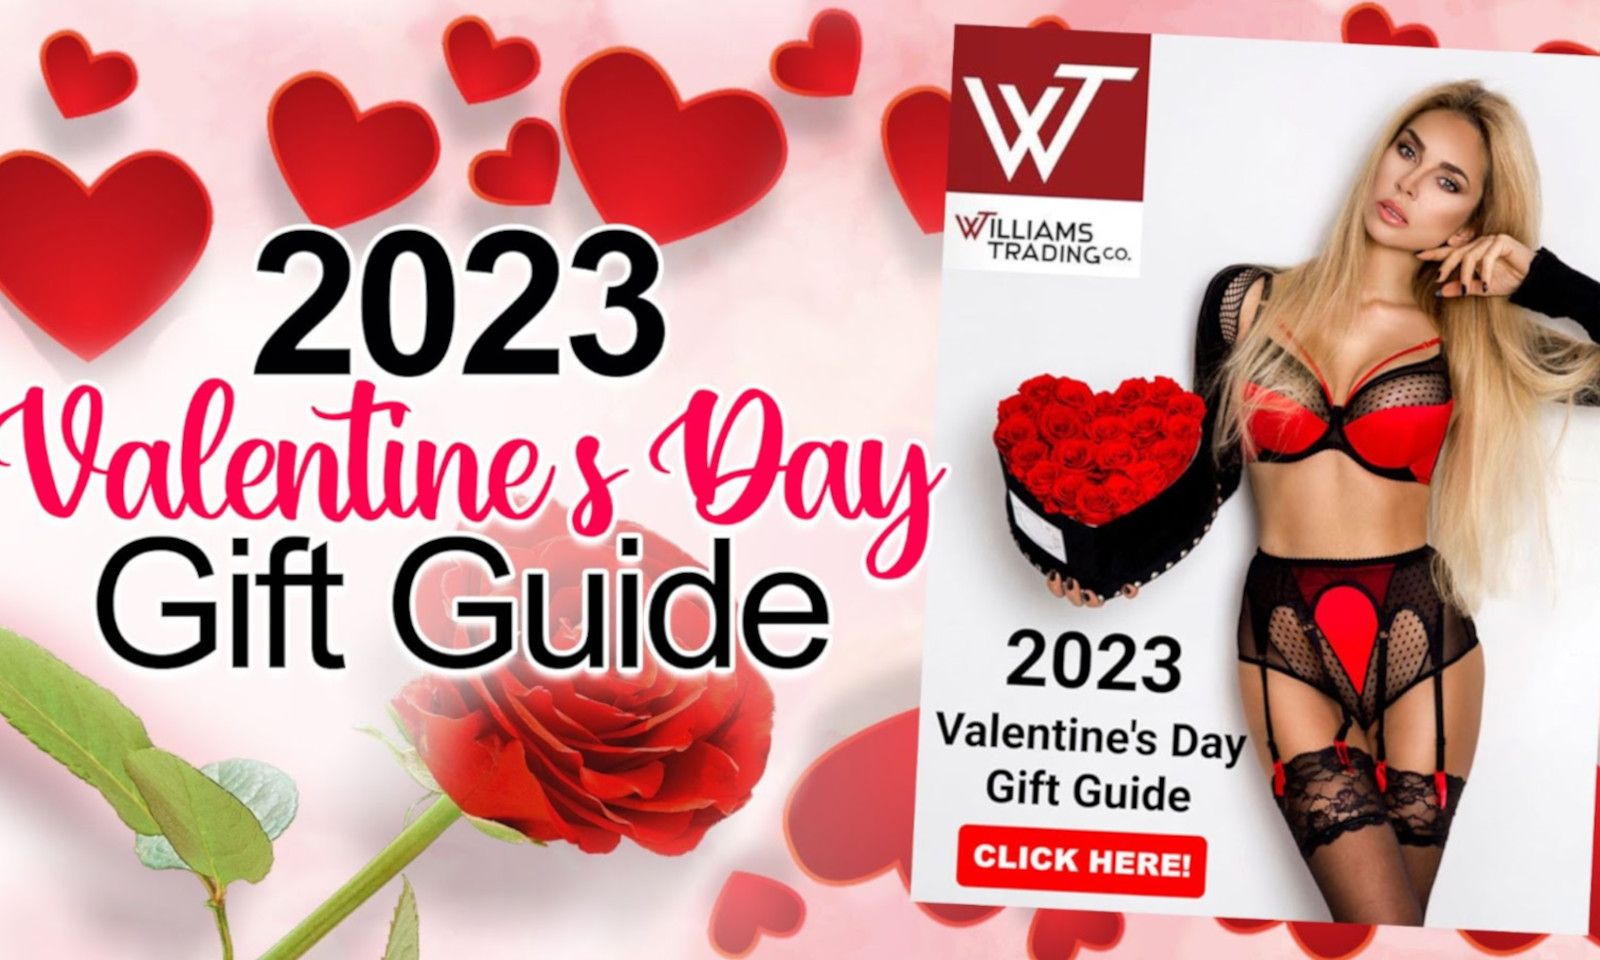 Williams Trading Co. Publishes Its Valentine's Day Catalog